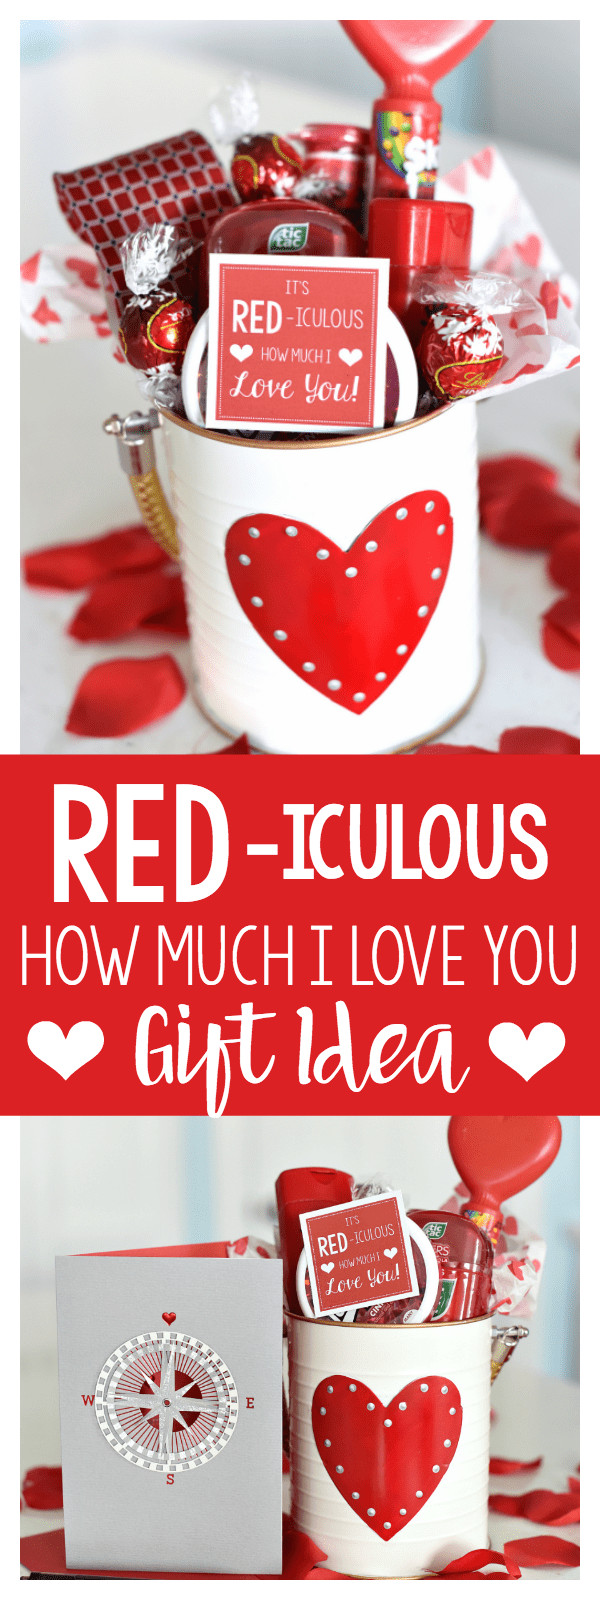 Cute Valentines Day Date Ideas
 Cute Valentine s Day Gift Idea RED iculous Basket